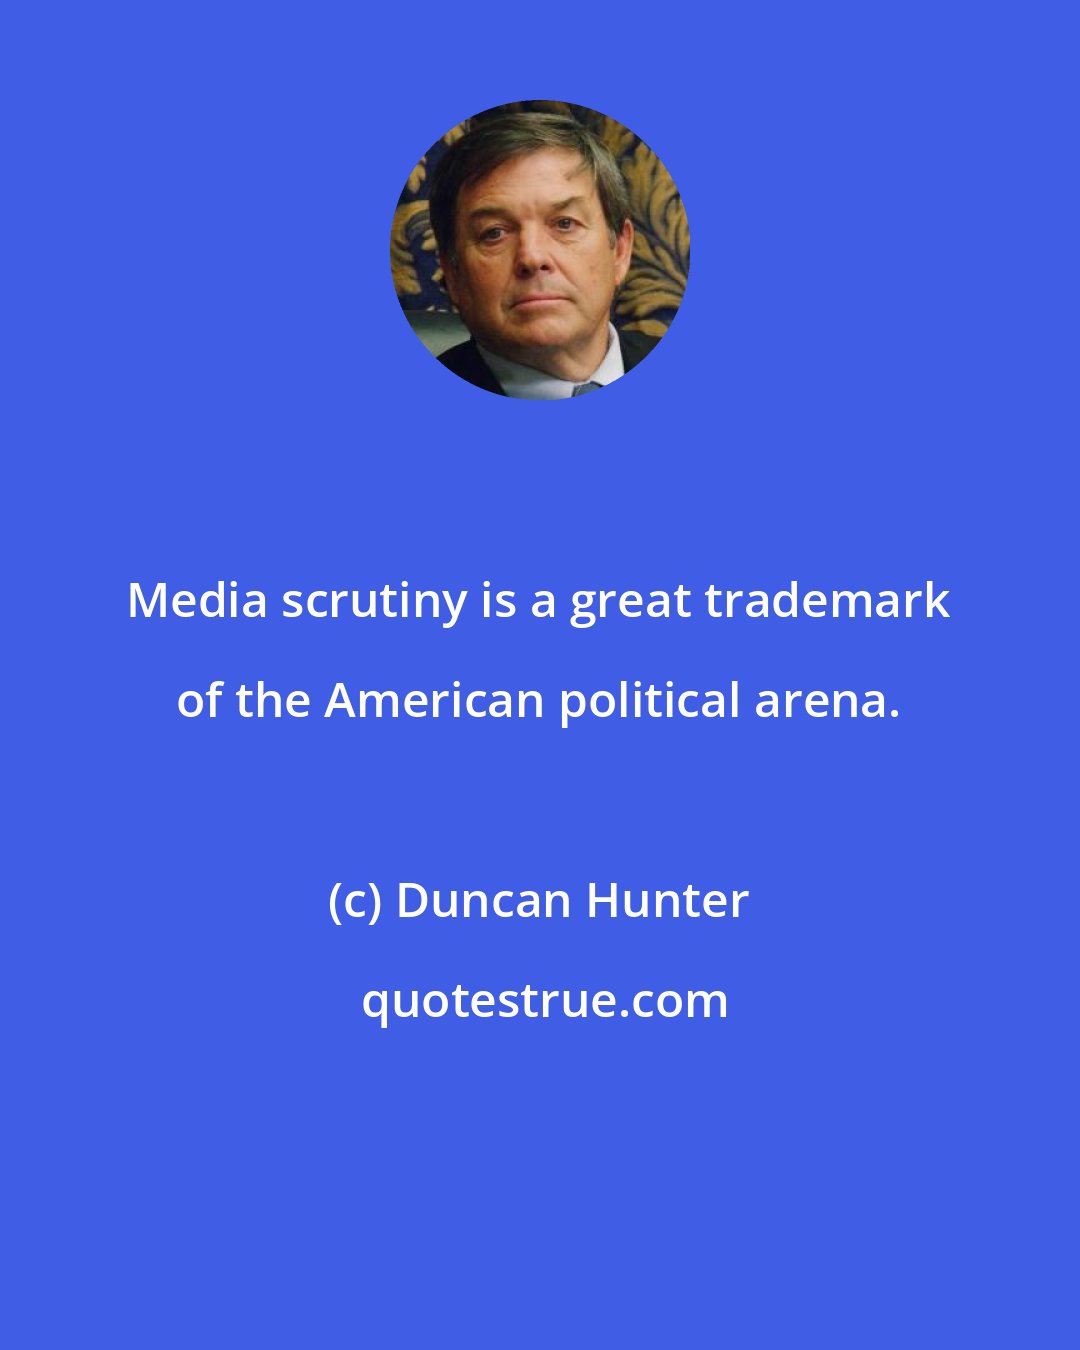 Duncan Hunter: Media scrutiny is a great trademark of the American political arena.